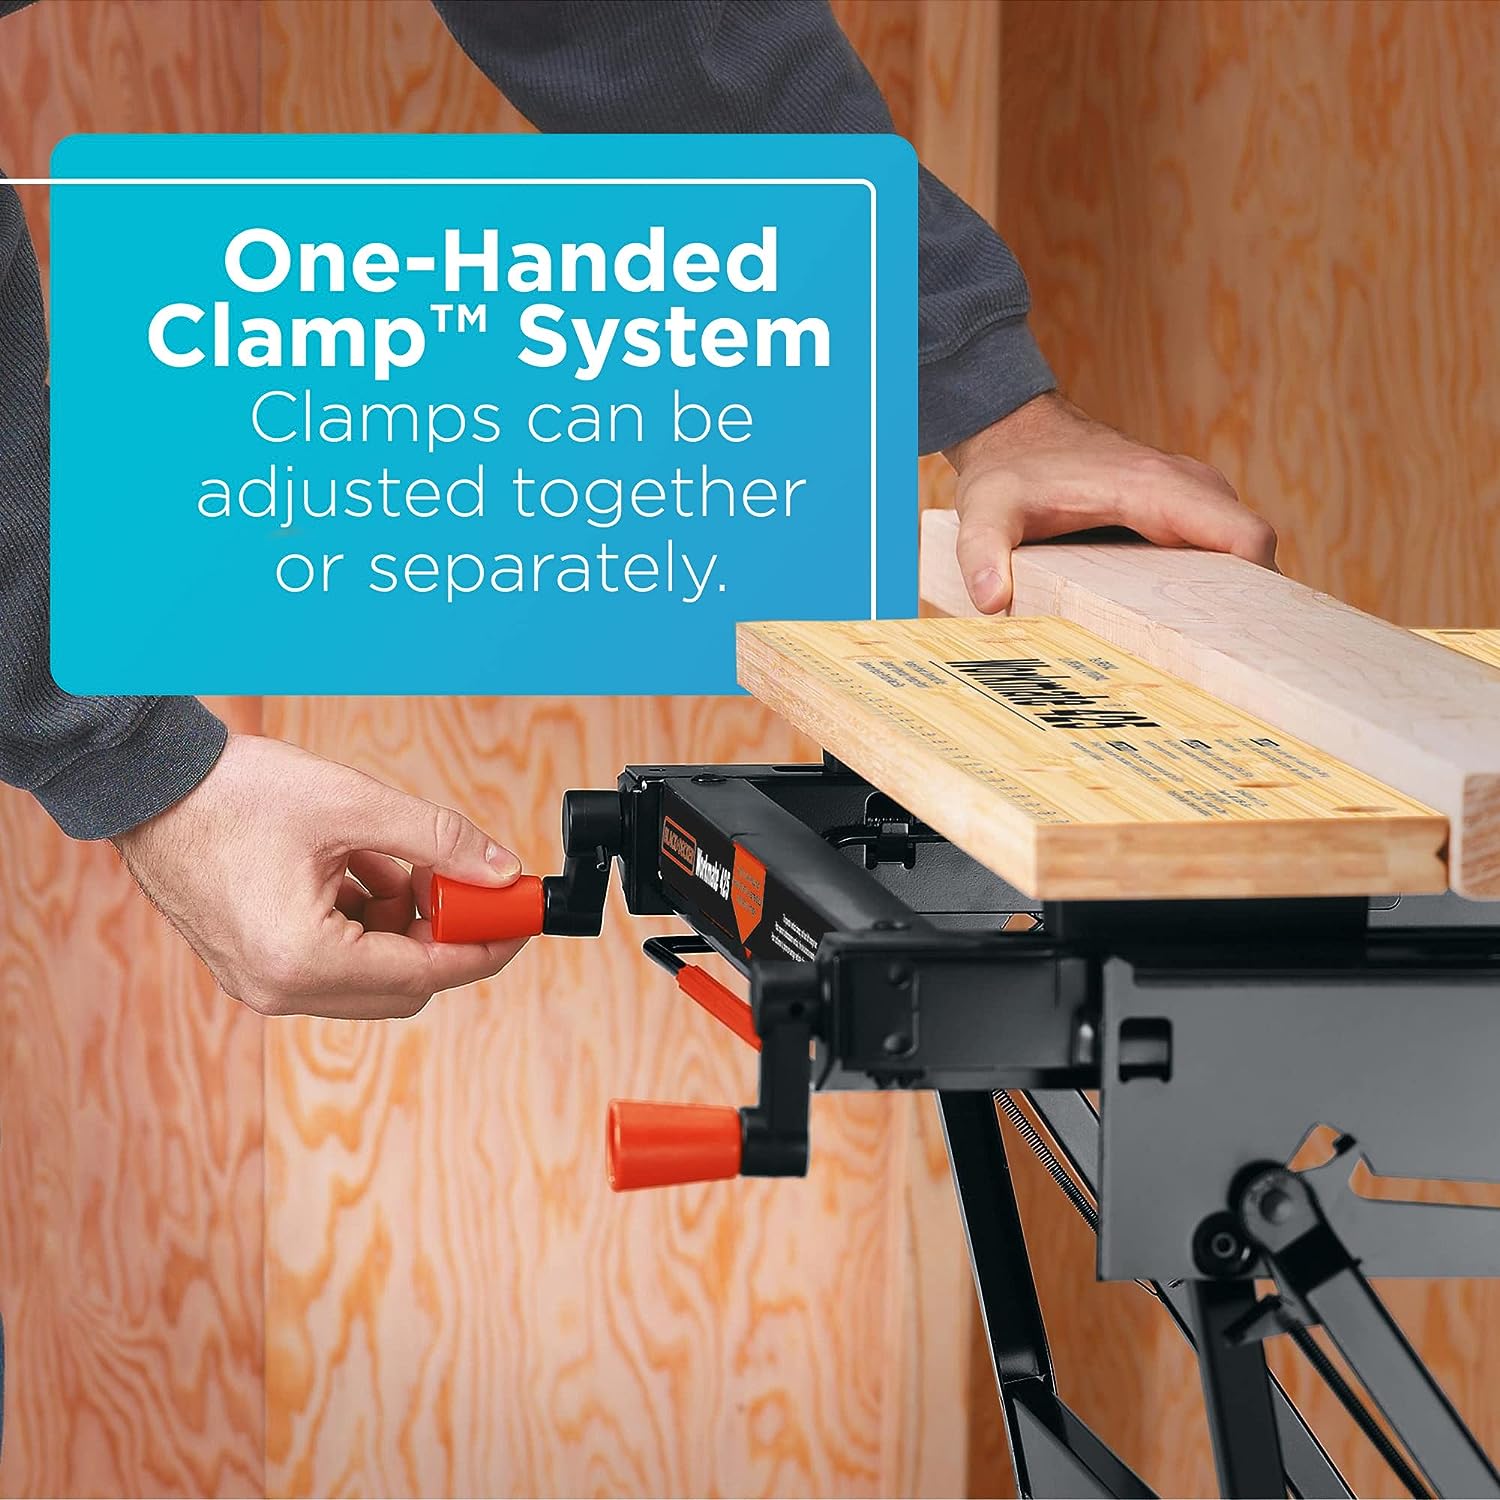 https://bigbigmart.com/wp-content/uploads/2023/10/BLACKDECKER-Workbench-Workmate-Portable-Holds-Up-to-550-lbs-Vertical-and-Horizontal-Clamping-Options-For-DIY-Woodworking-and-More-WM425-A4.jpg